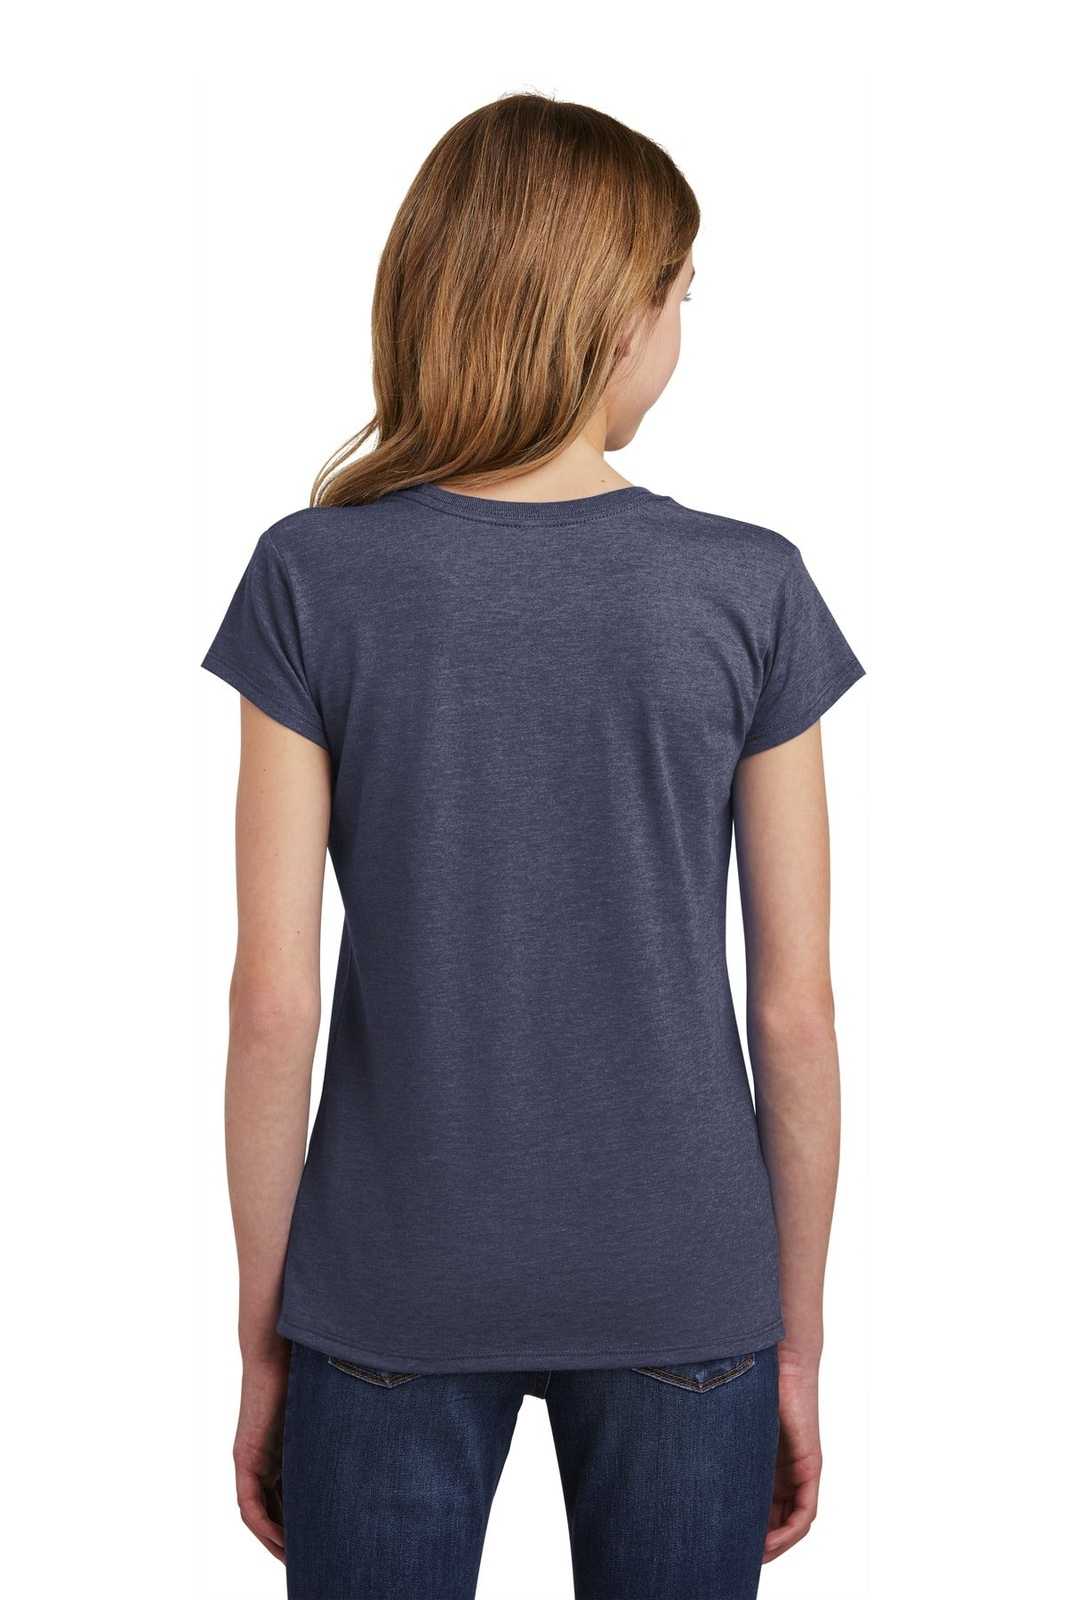 District DT6001YG Girls Very Important Tee - Heathered Navy - HIT a Double - 1